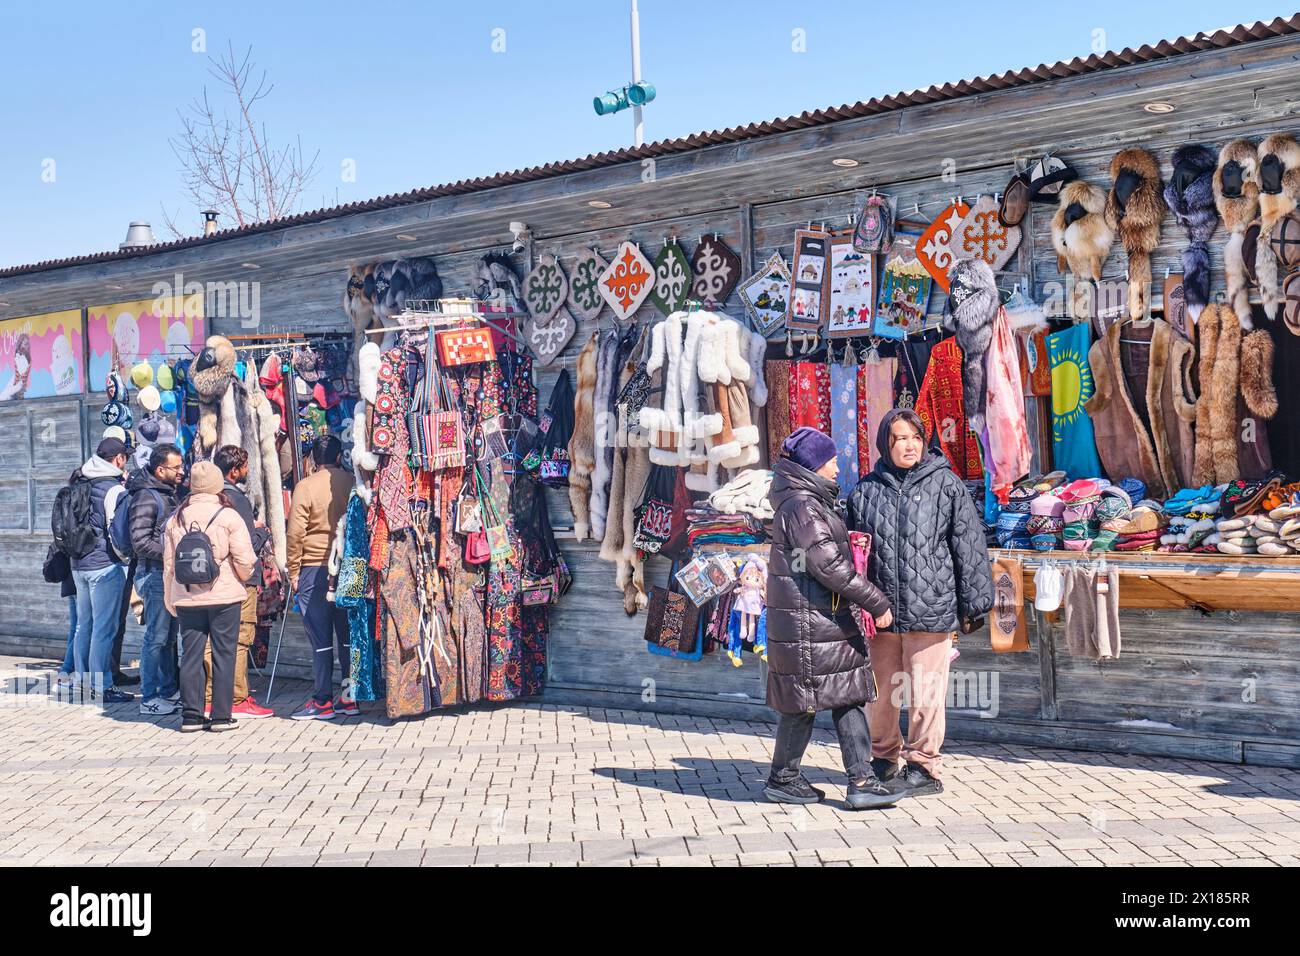 People in souvenir shop at outdoors local market. Kazakh colorful souvenirs and crafts. Stock Photo